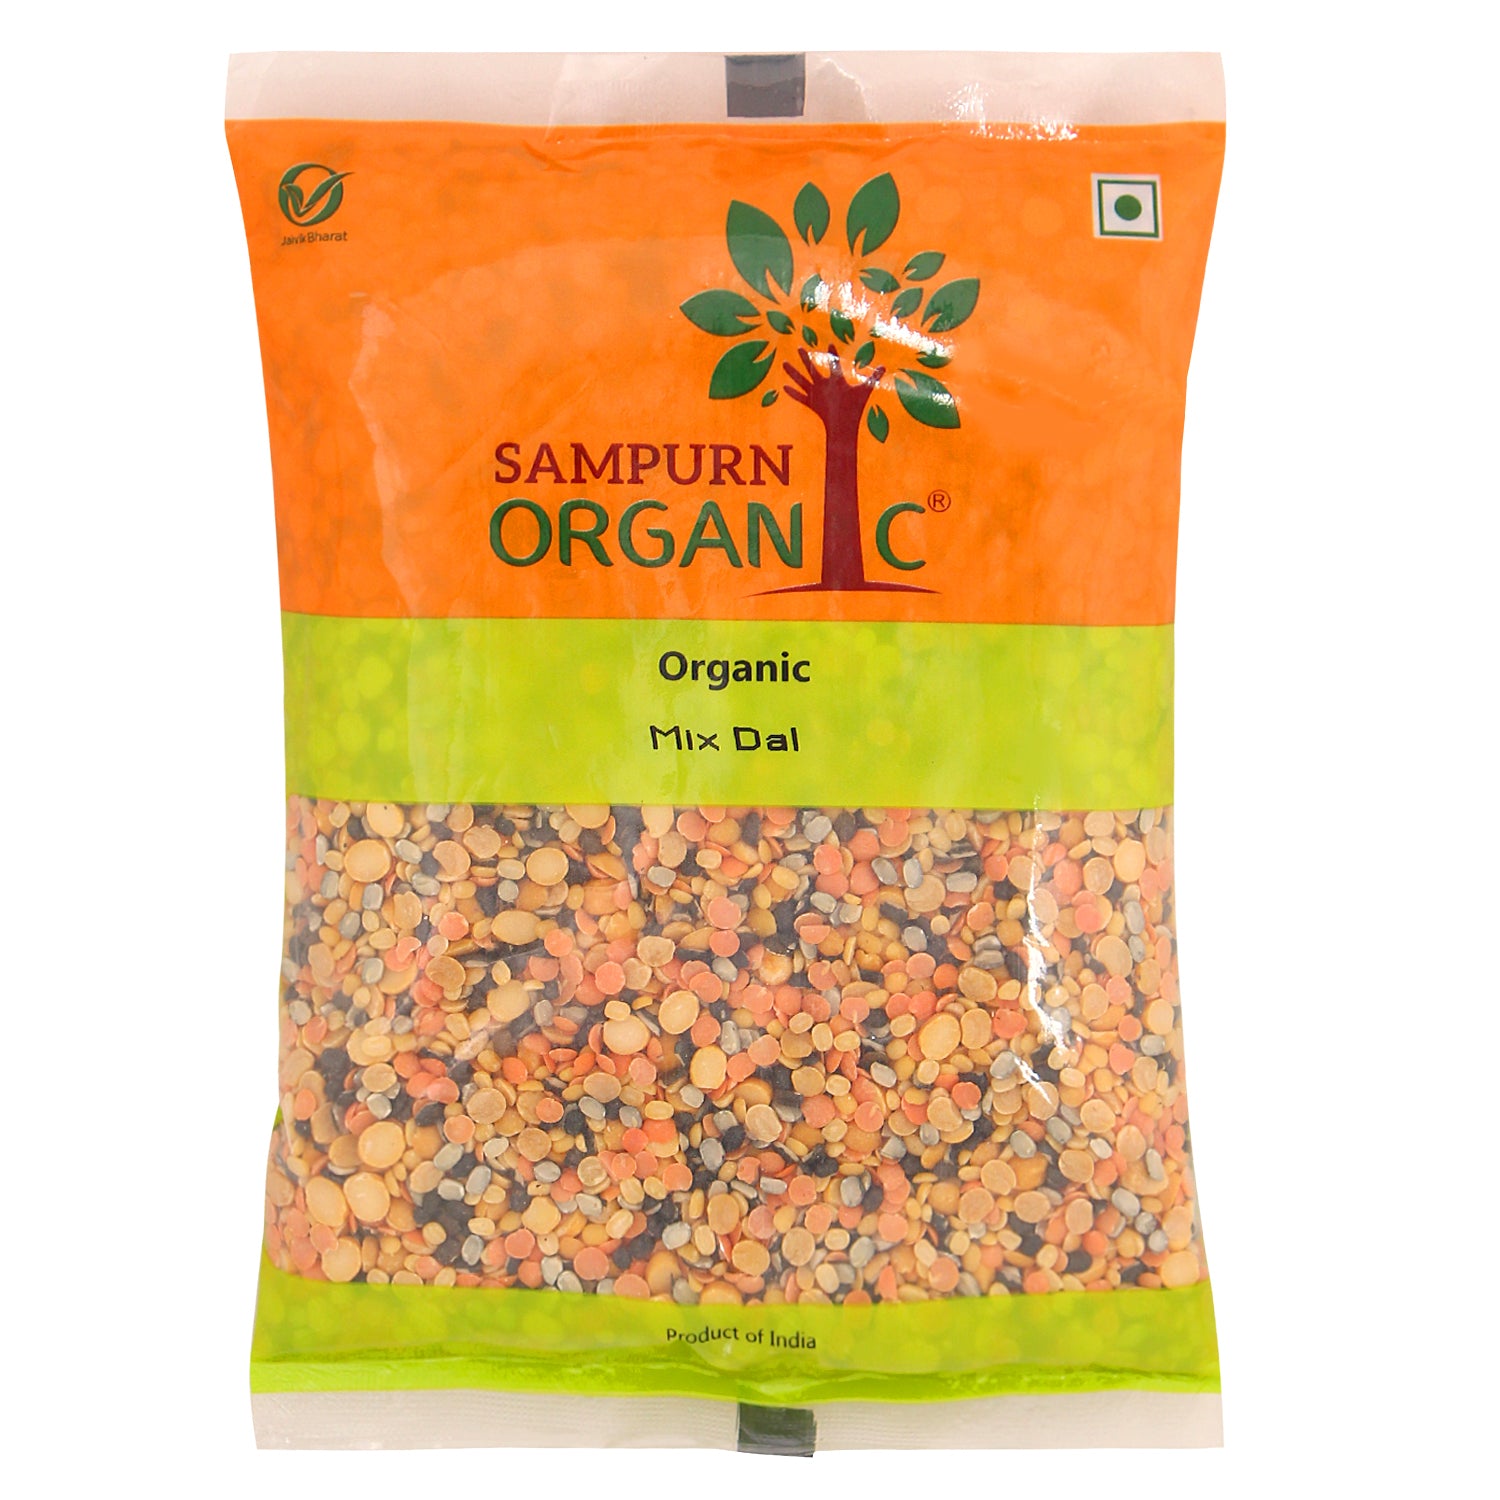 Sampurn Organic Mix dal. This pure,organmix dal is protein rich and is used to prepare panch ratna dal. Health Benefits: Rich in dietary fibre, low in cholesterol and ic